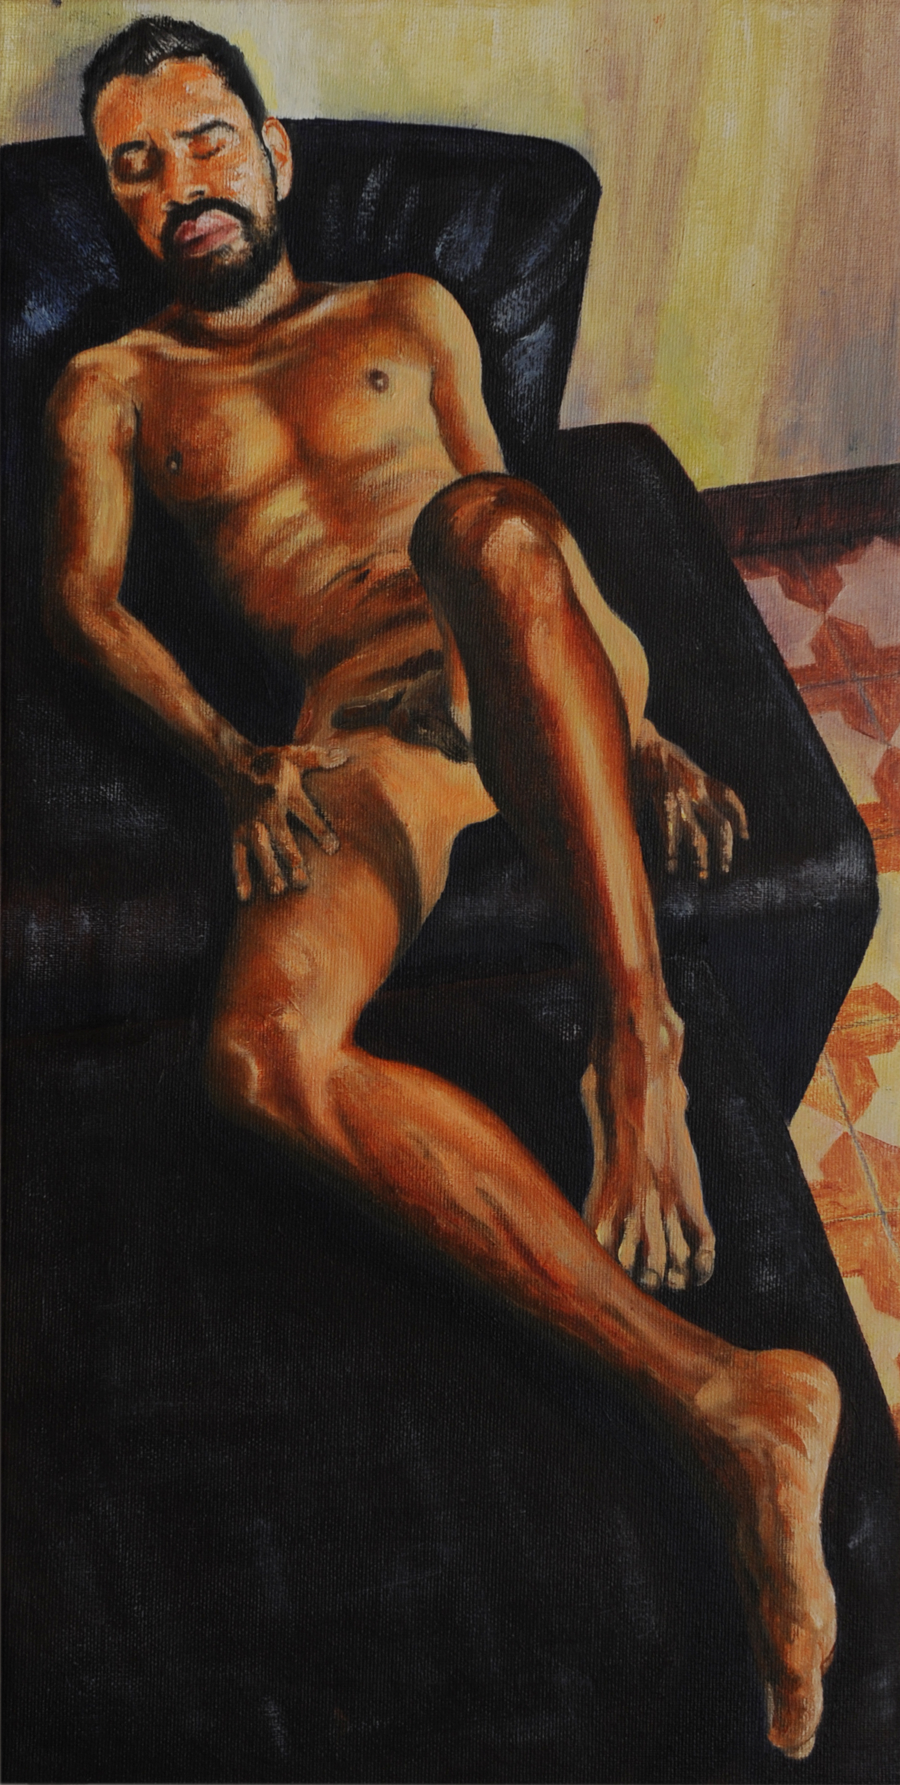 Oil painting of a naked, bearded Latin man, 40s, lying on a leather couch, eyes closed, sunlit from the right.